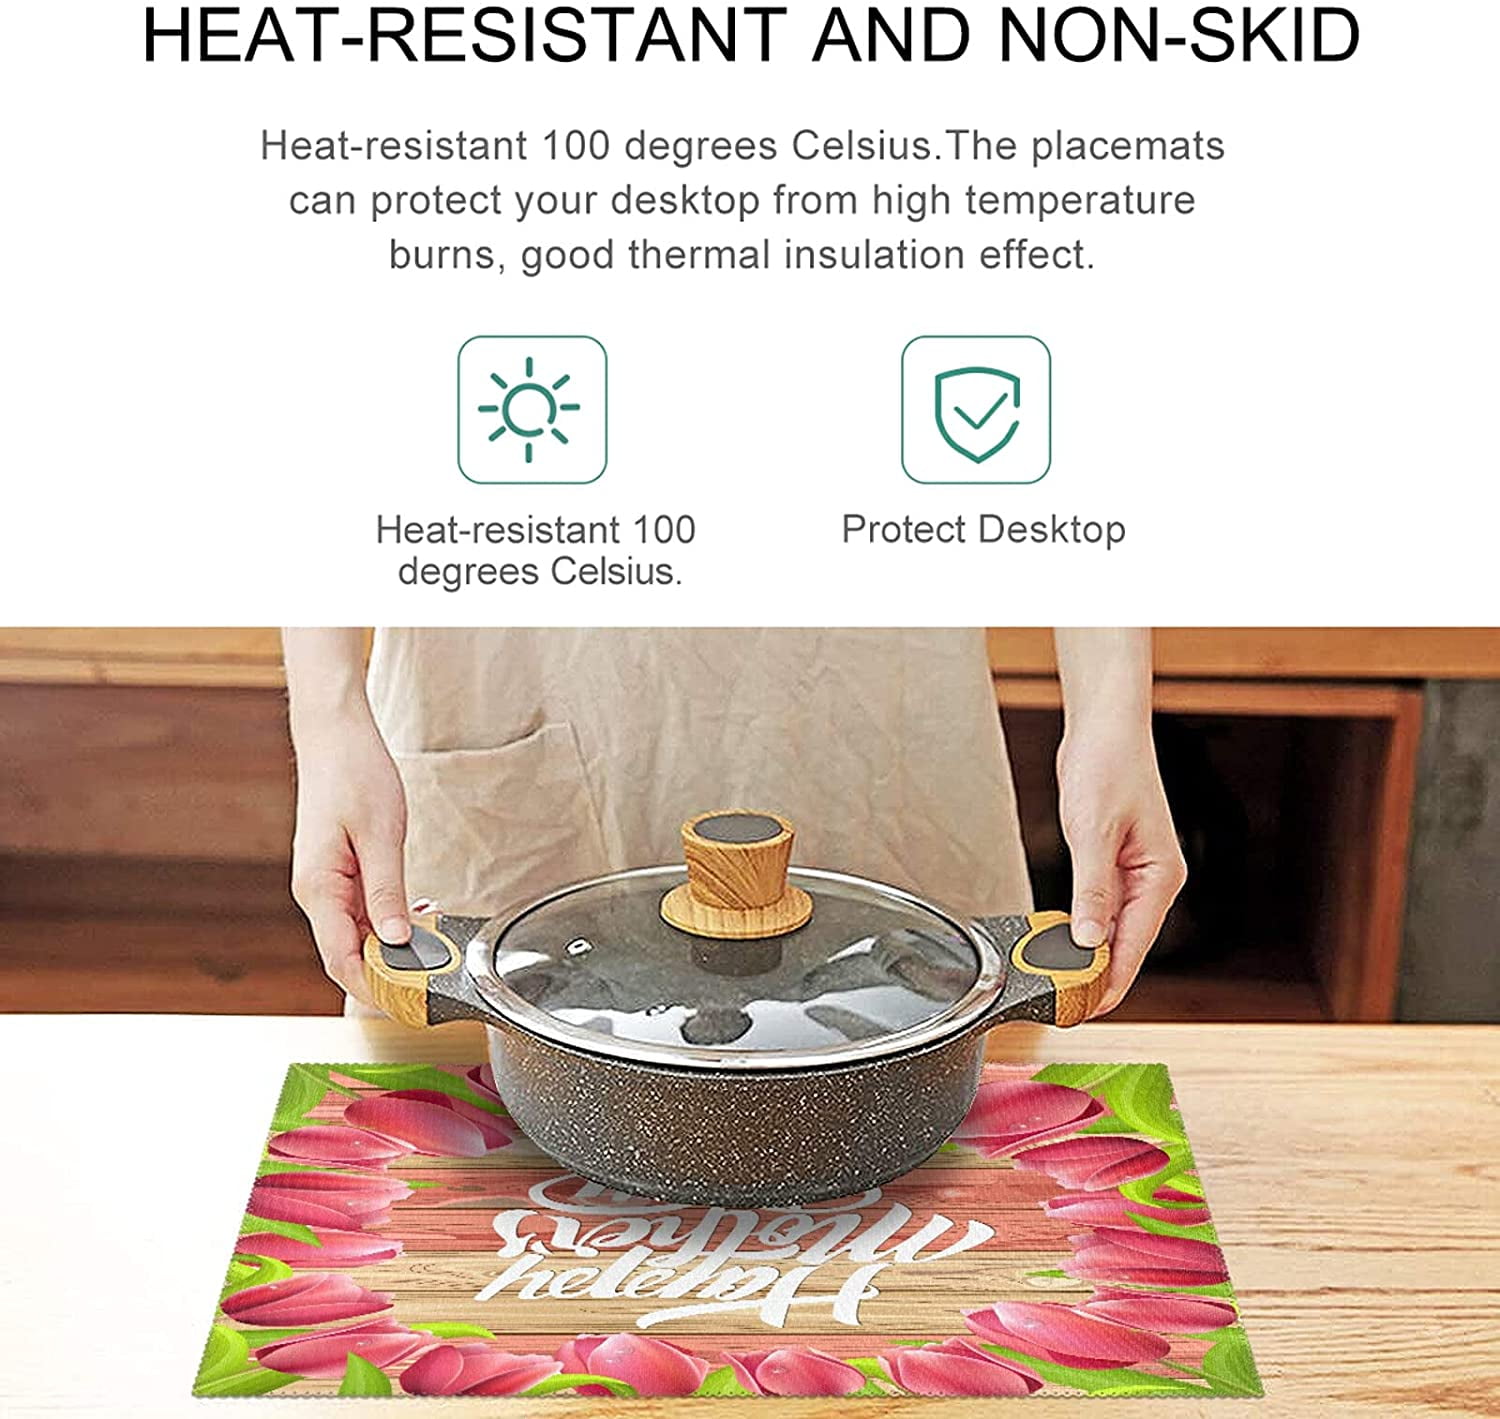 Floral Flower Heat-Resistant Washable Table Place Mats for Kitchen Dining Table Decoration Naanle Sunflower Placemat Set of 6